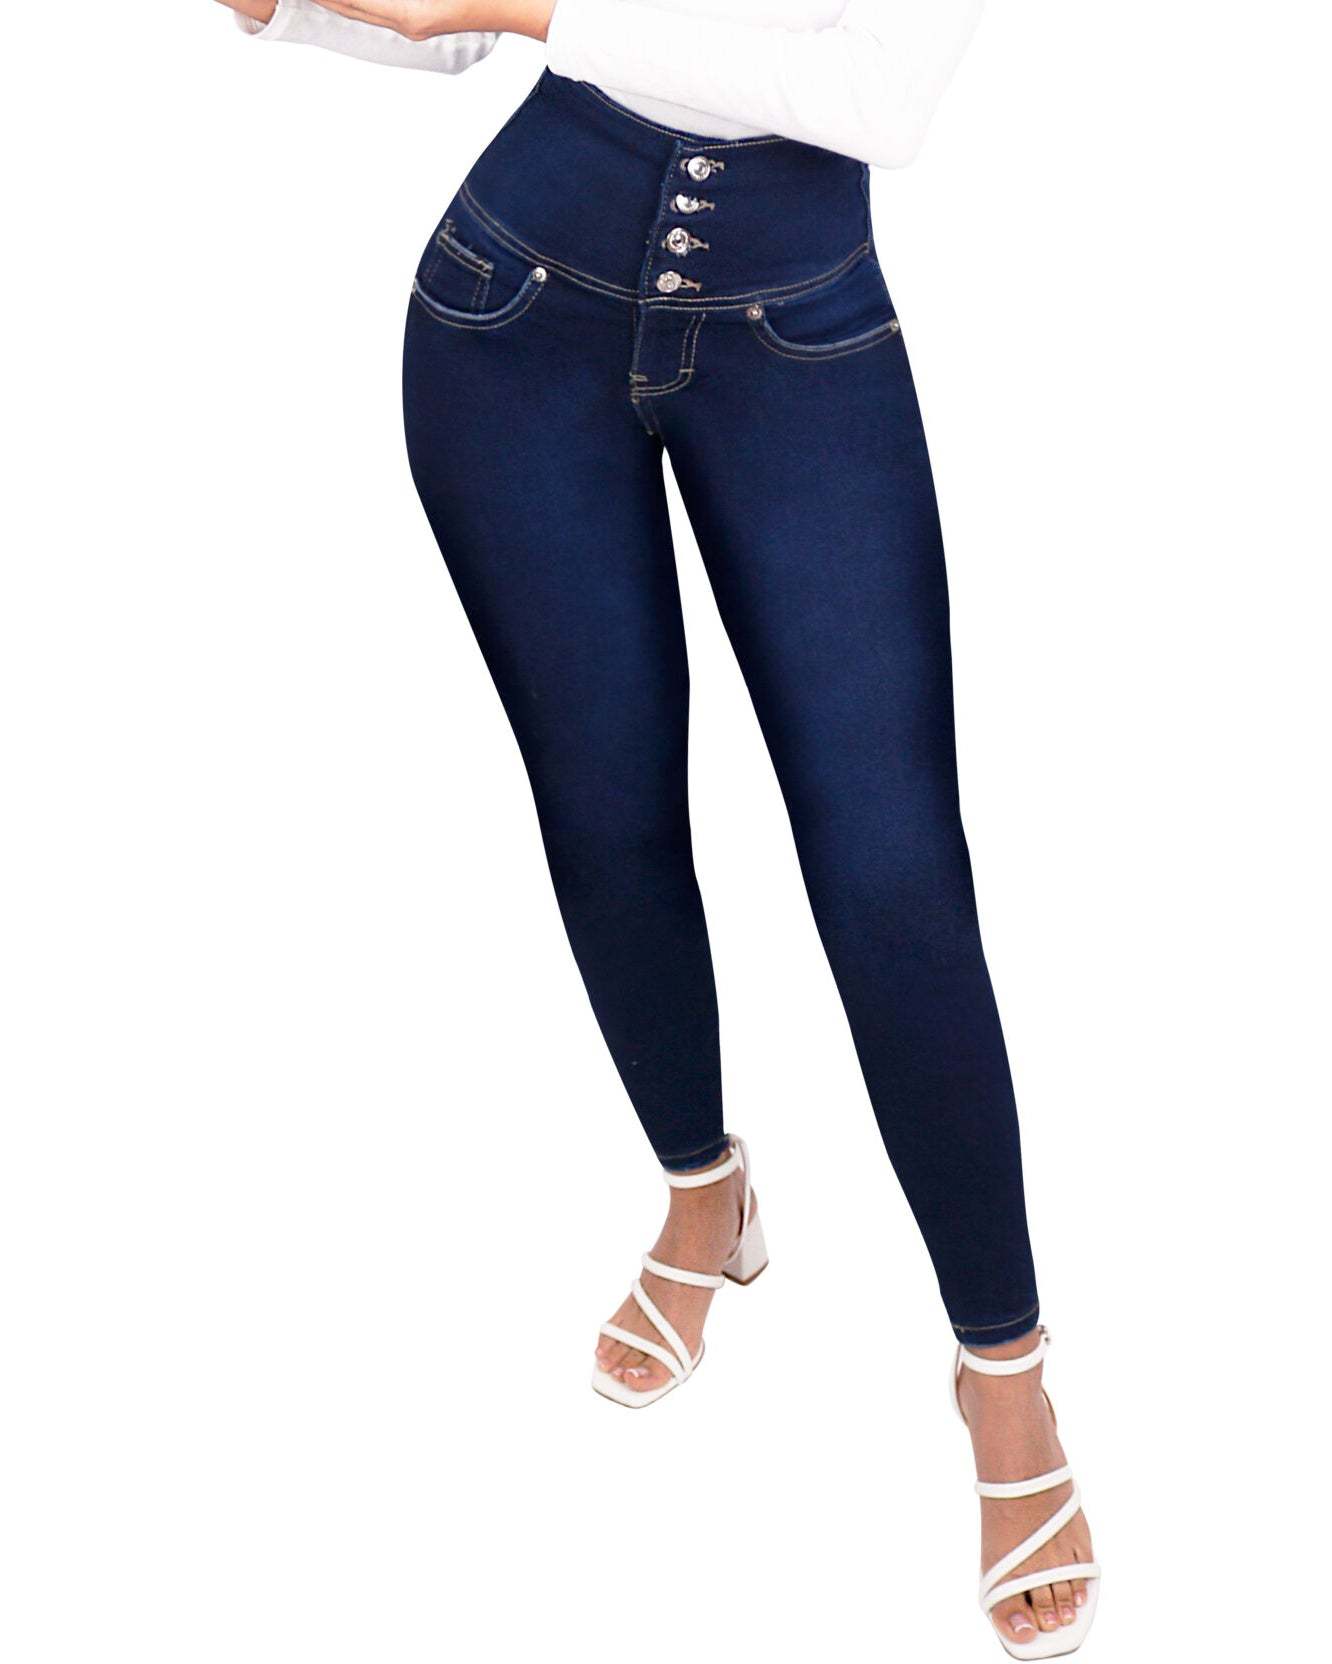 Slimming Jeans With Buttocks, Tummy And Skinny Legs